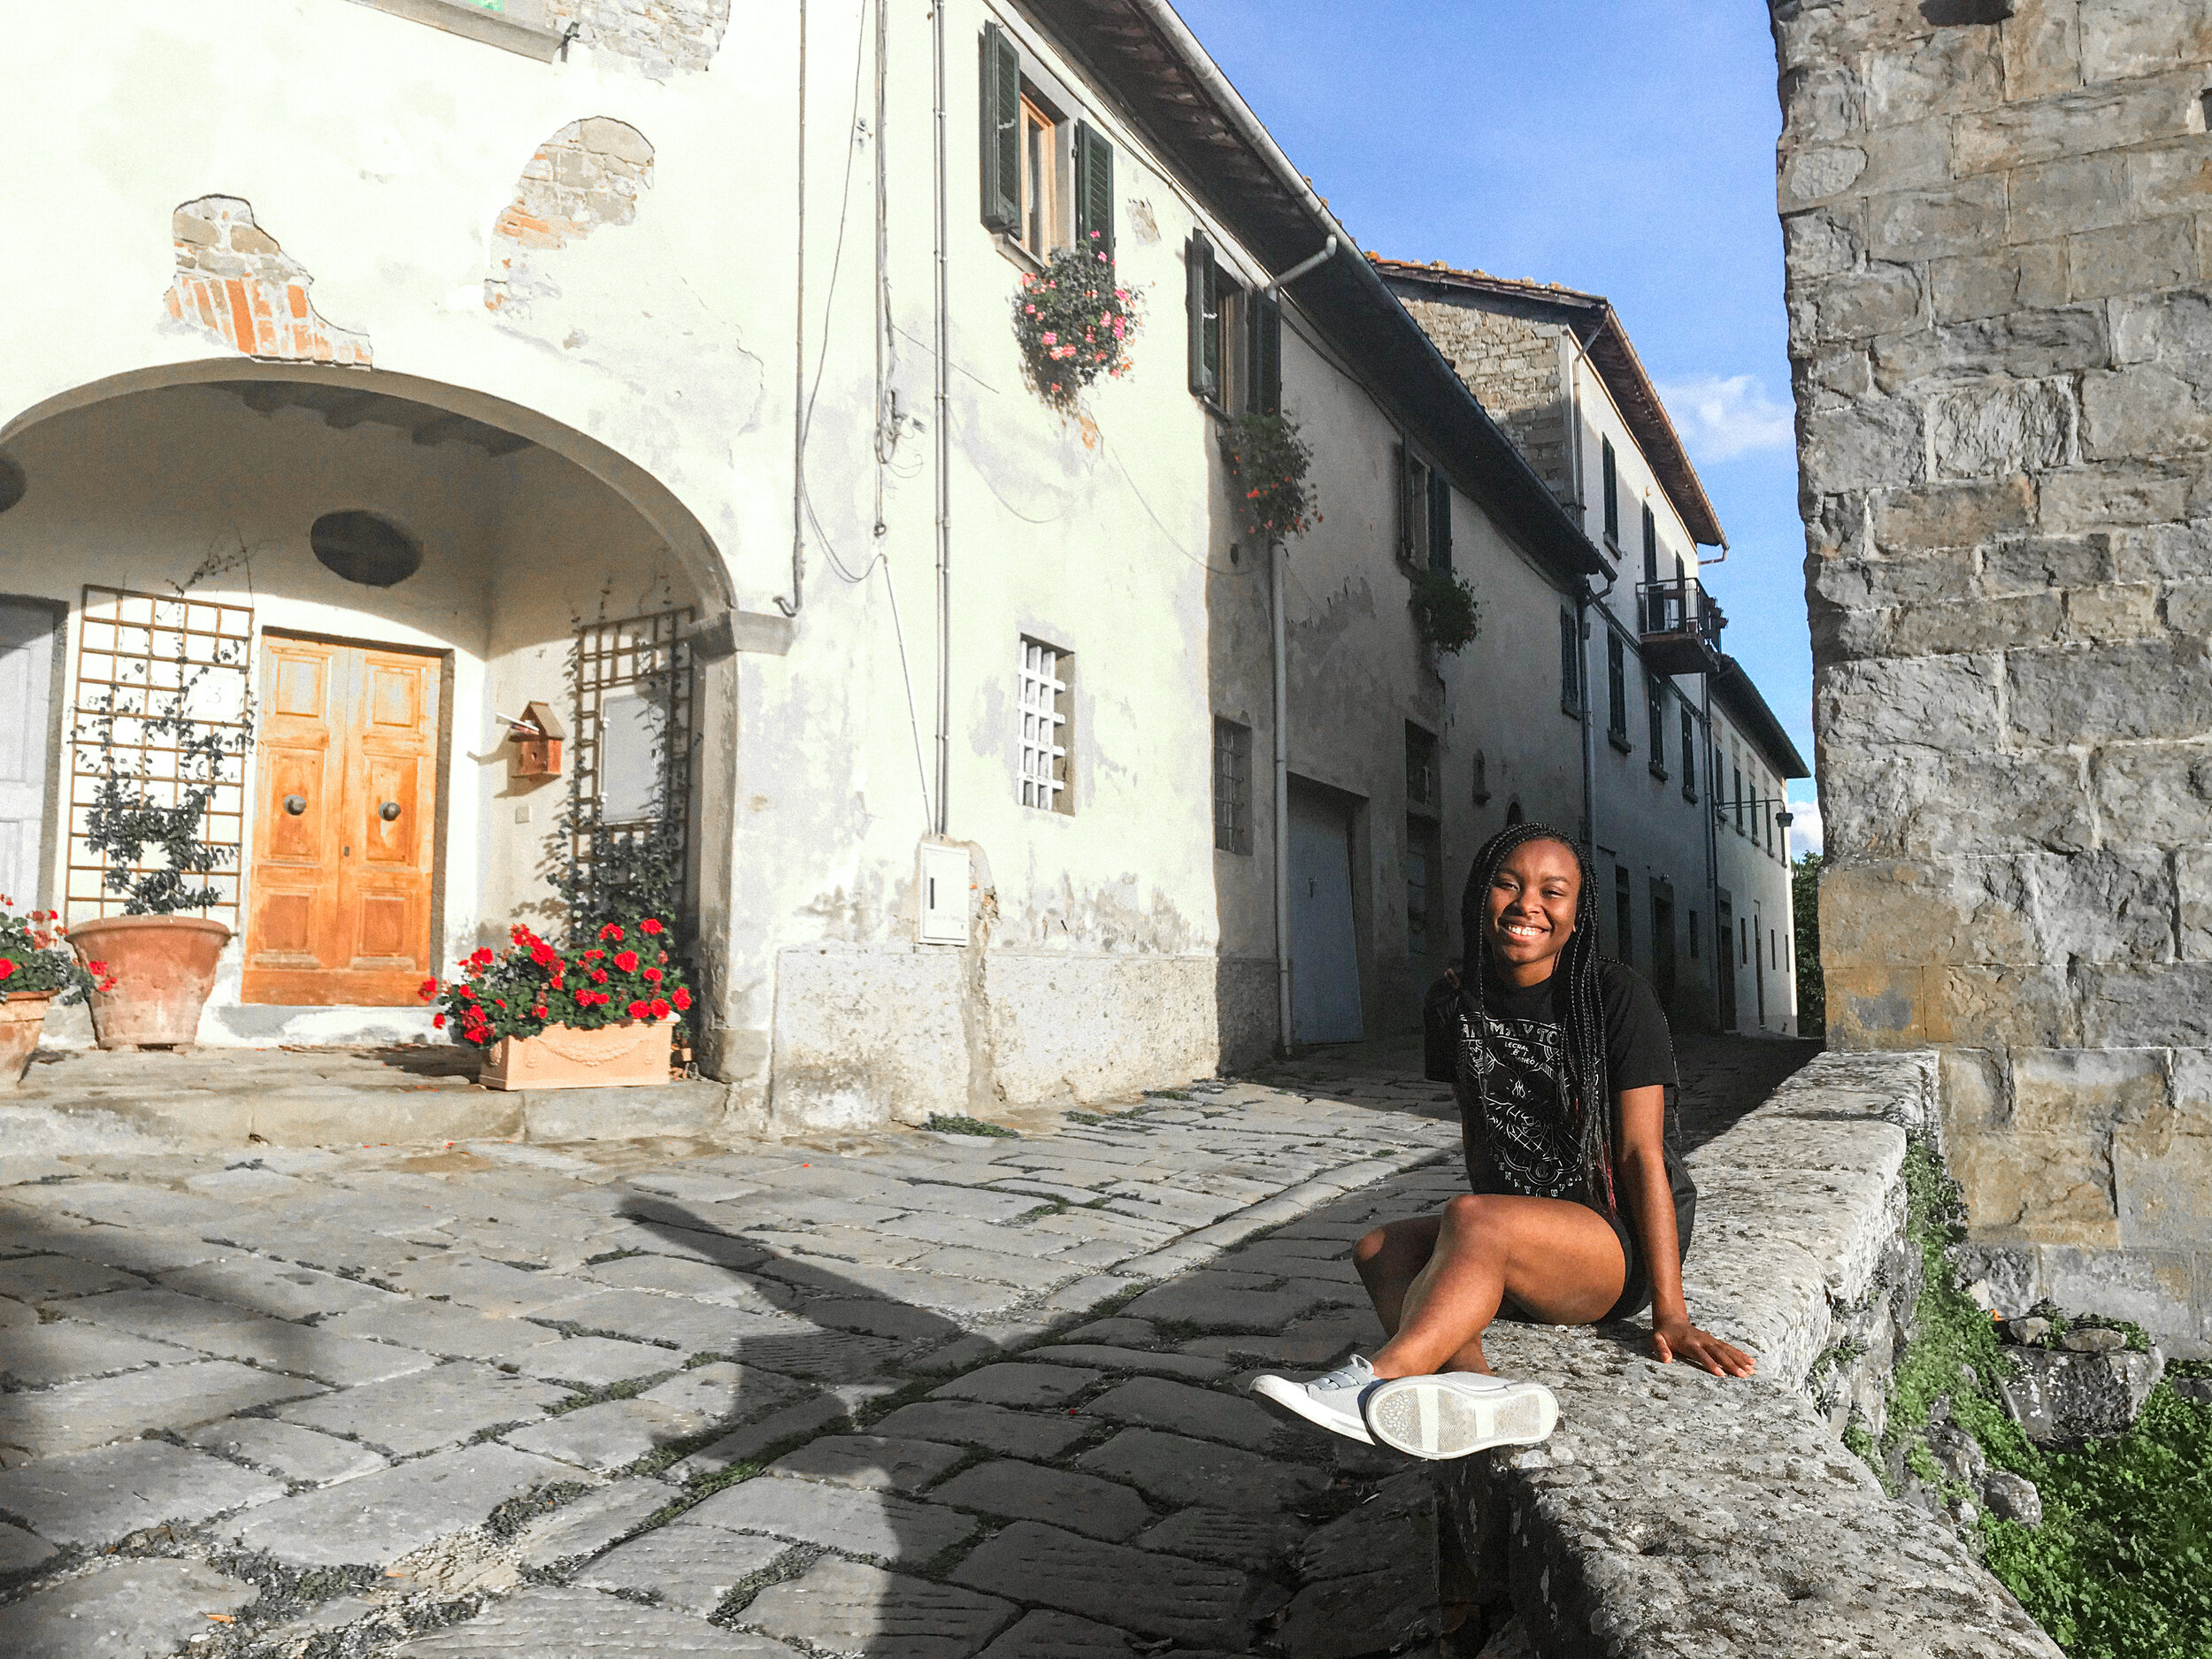 Tuscany, Italy; October 2019 - First stop on my European multi-city tour